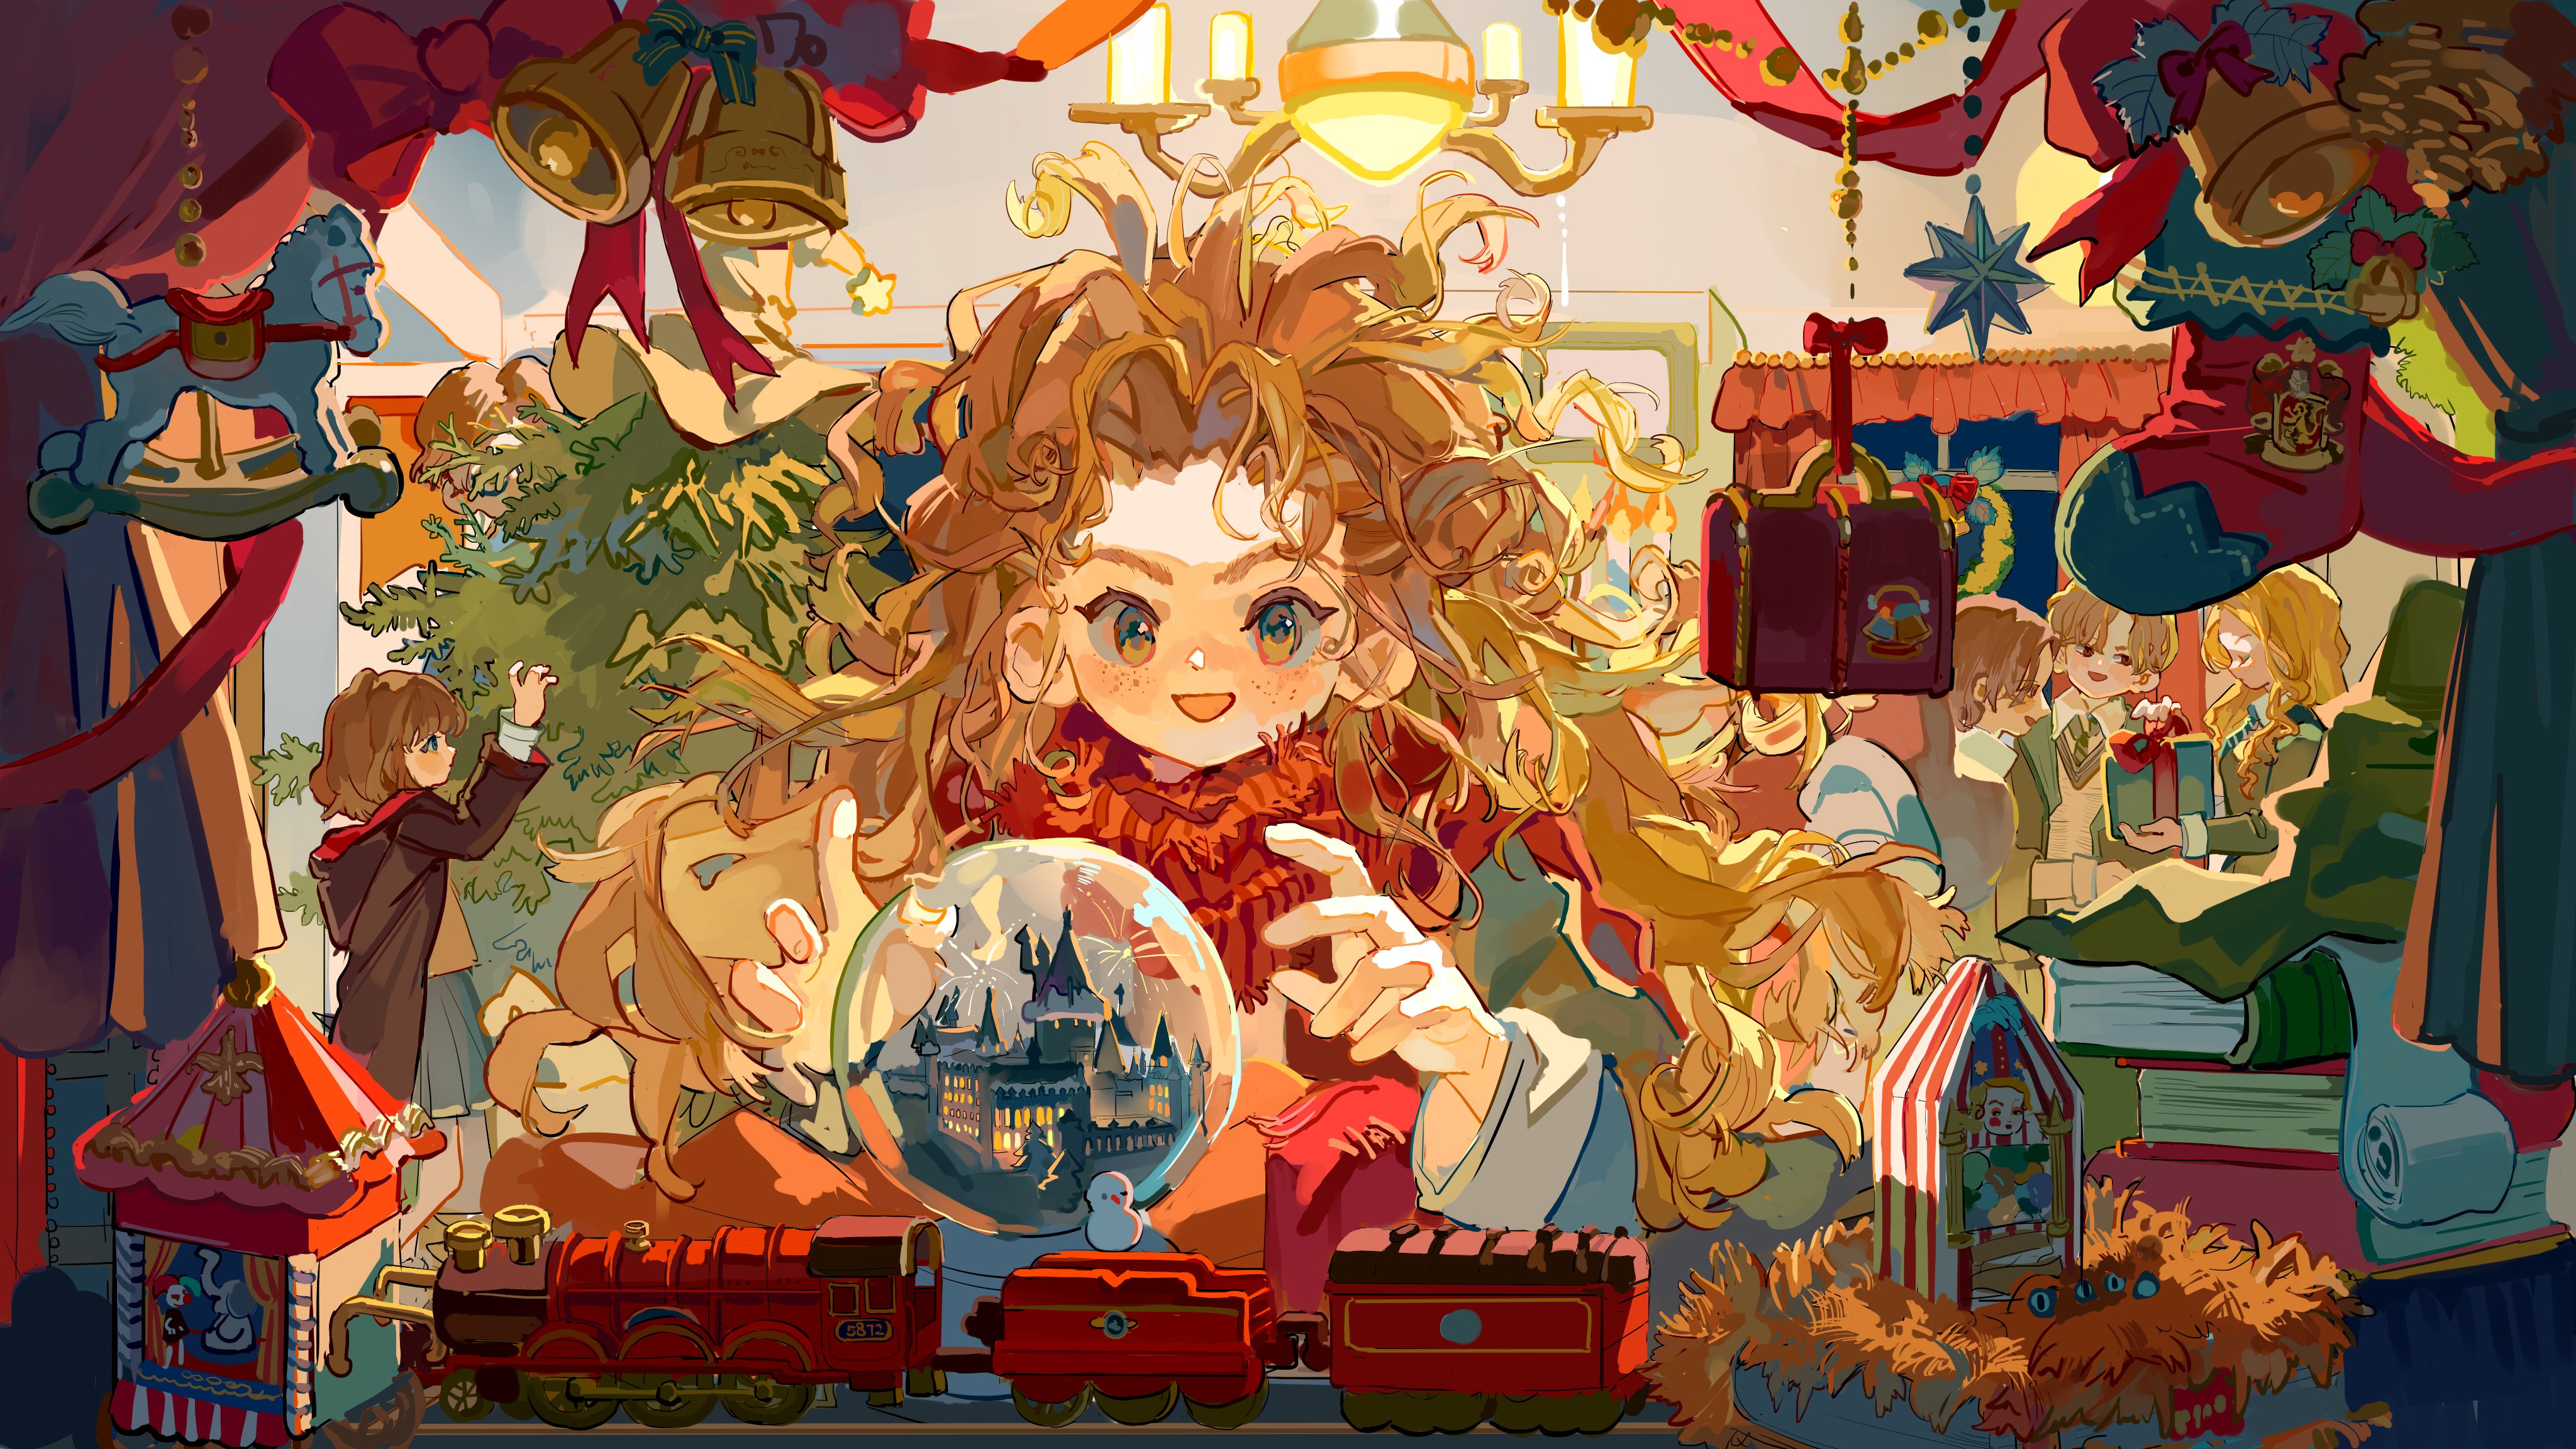 Anime 4096x2304 Harry Potter: Magic Awakened Harry Potter Abigail Grey Cassandra Vole Colby Frey Fischer Frey Christmas tree Robyn Thistlethwaite toys group of people long hair blonde Putong Xiao Gou Christmas presents bells snow globe open mouth Christmas school uniform red scarfs messy hair